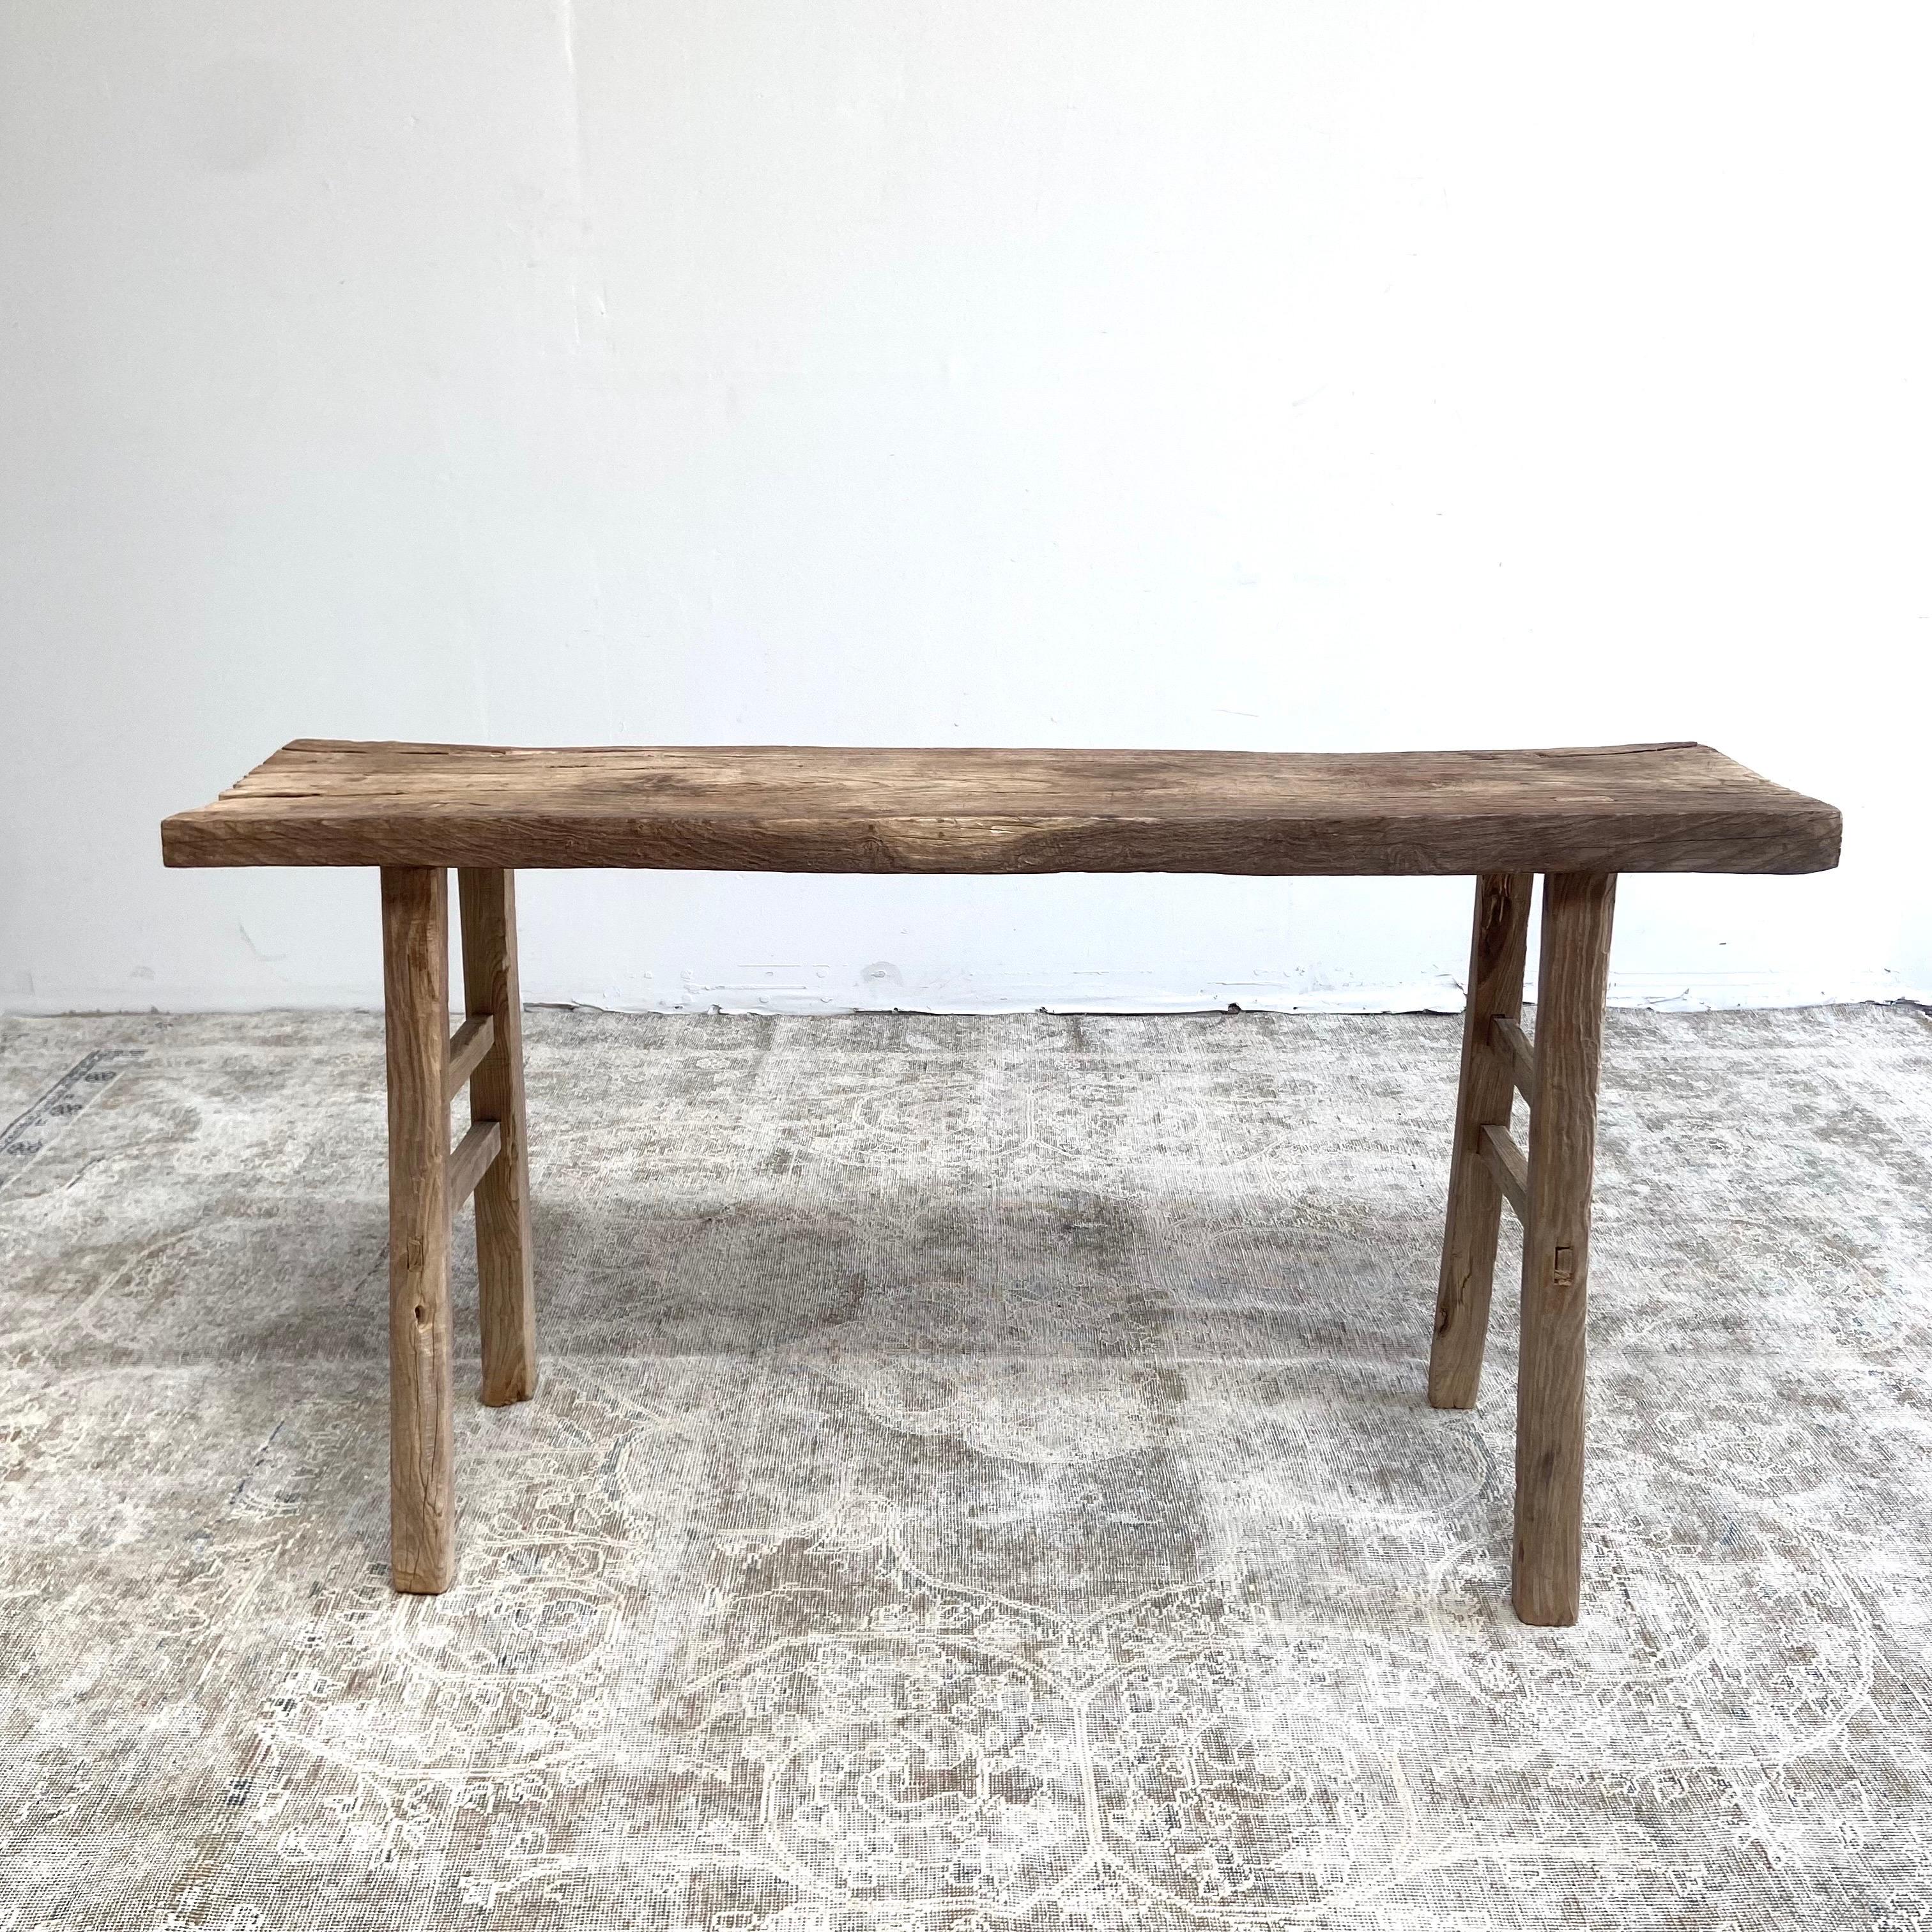 Antique elm wood console table Beautiful antique patina, with weathering and age, these are solid and sturdy ready for daily use, use as a entry table, sofa table or console in a dining room. Great in a living room with baskets or ottomans stored